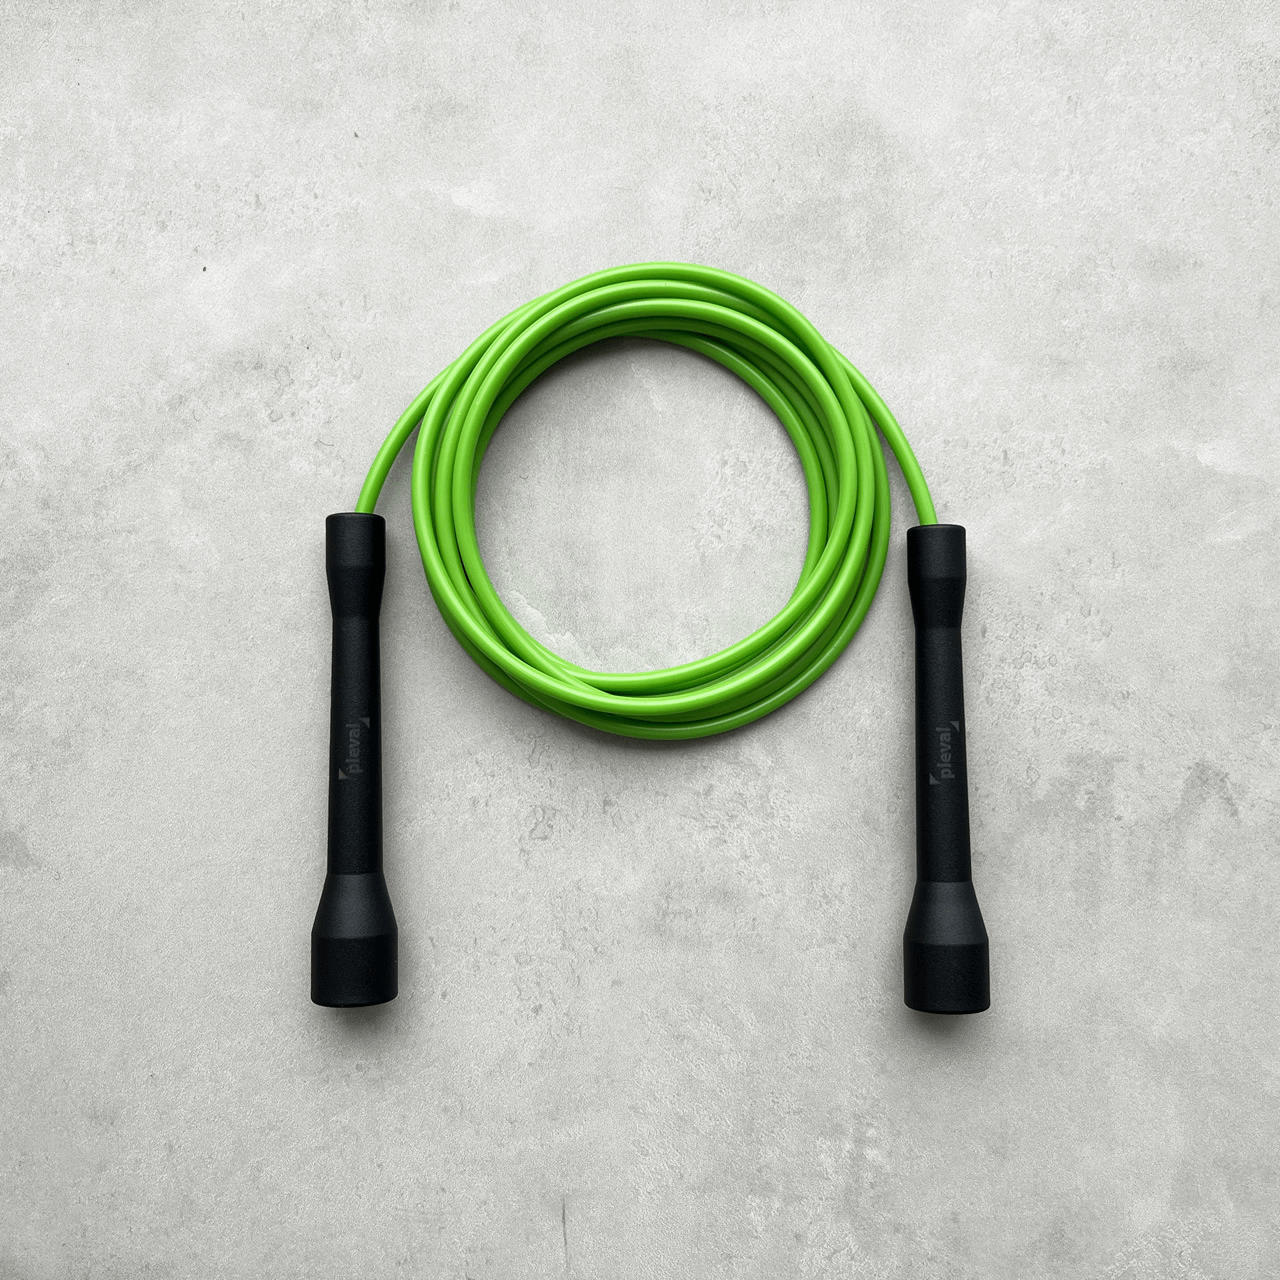 How does the length of a jump rope impact its usability for different users?